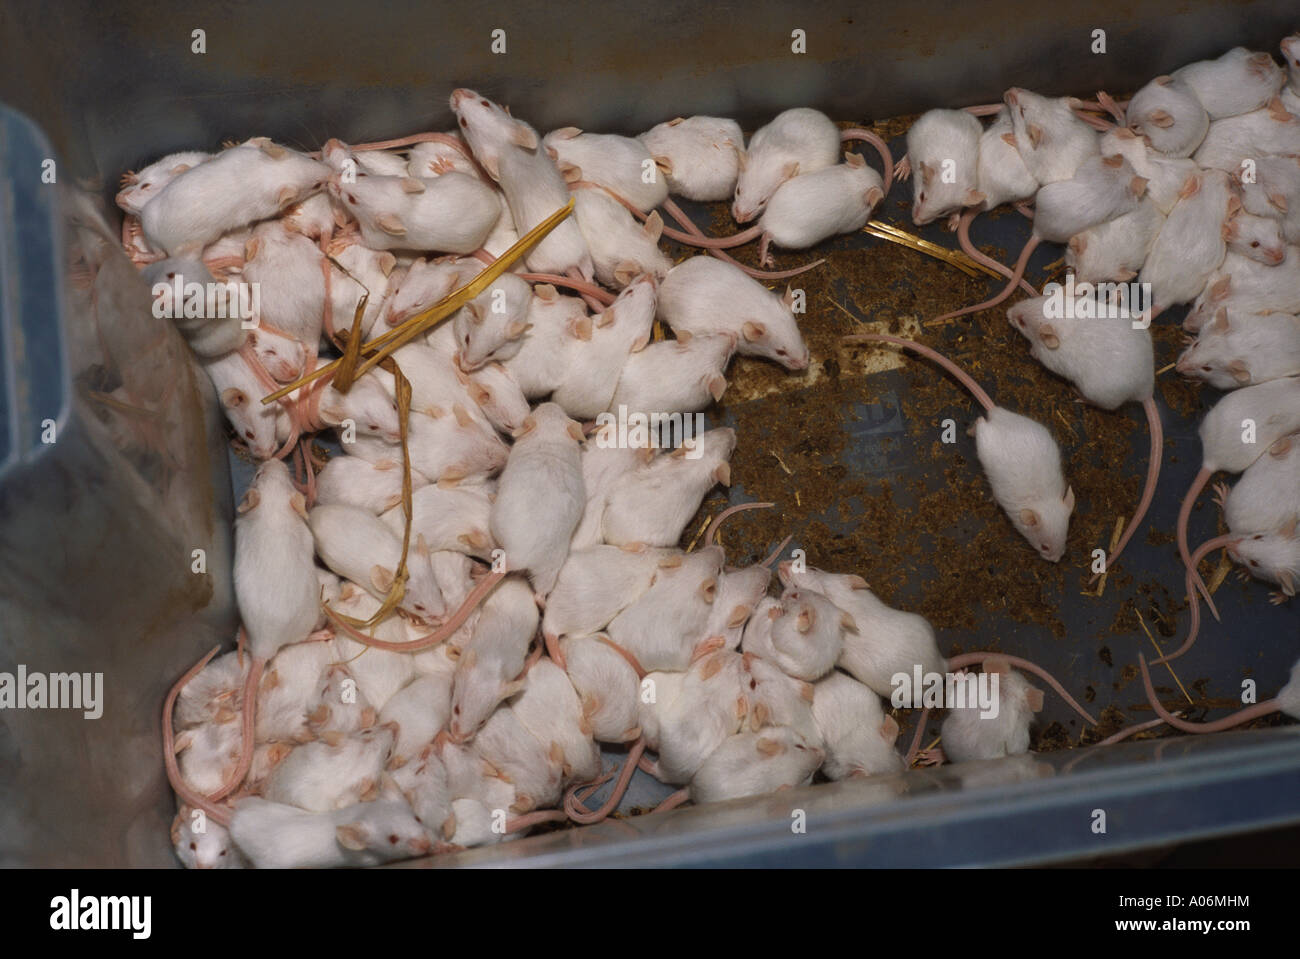 White Mice grown for live reptile feed on farm Stock Photo